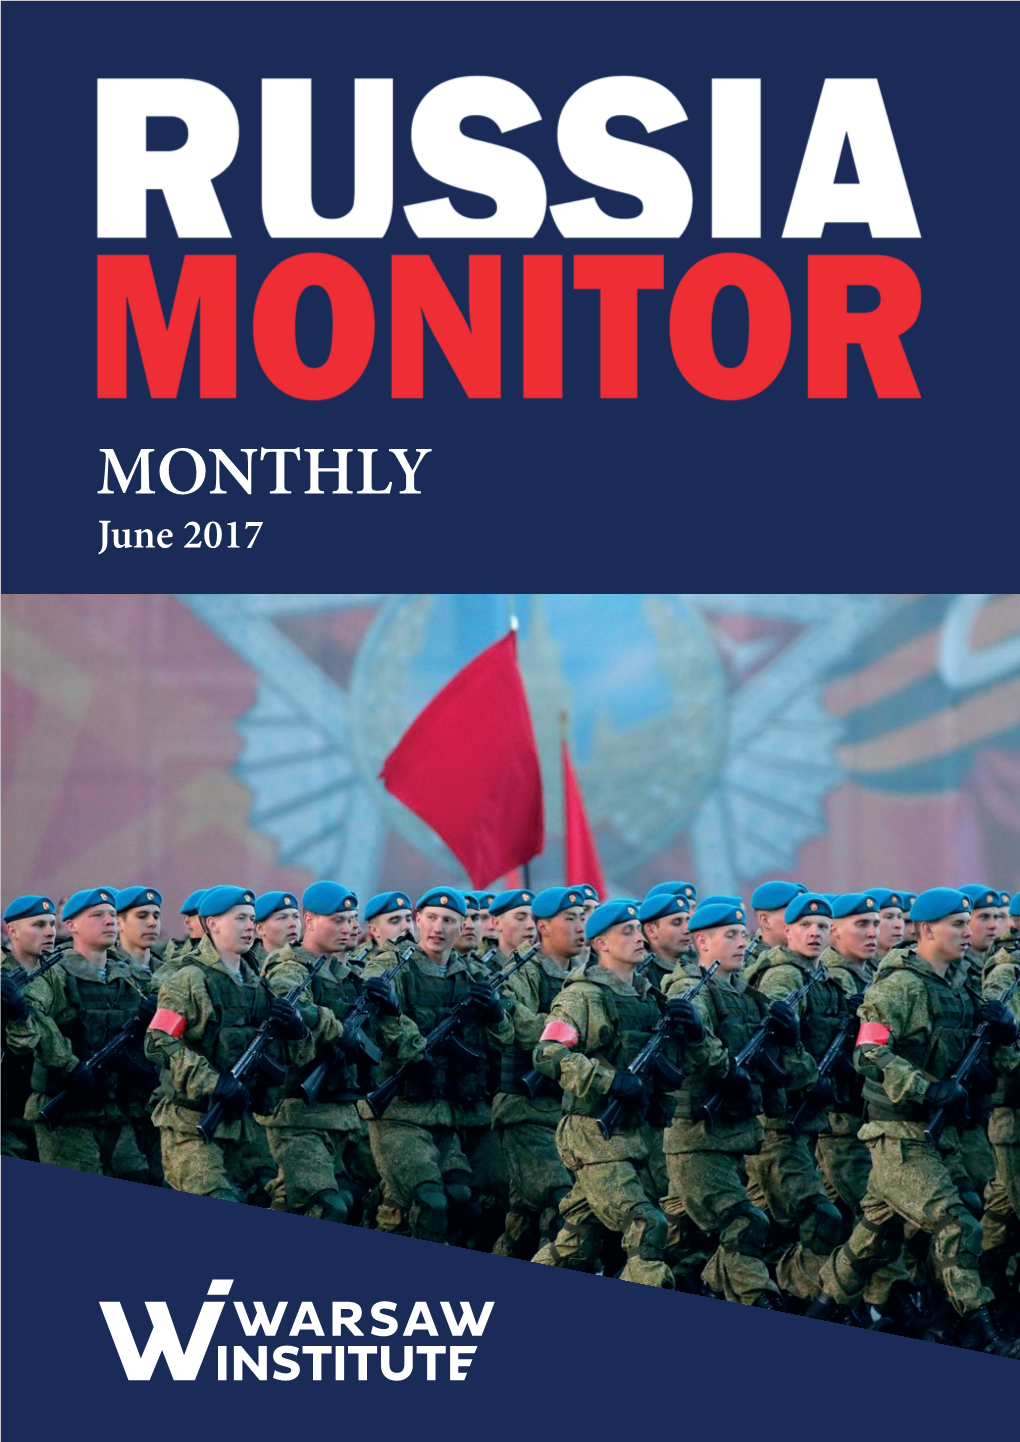 MONTHLY June 2017 CONTENTS